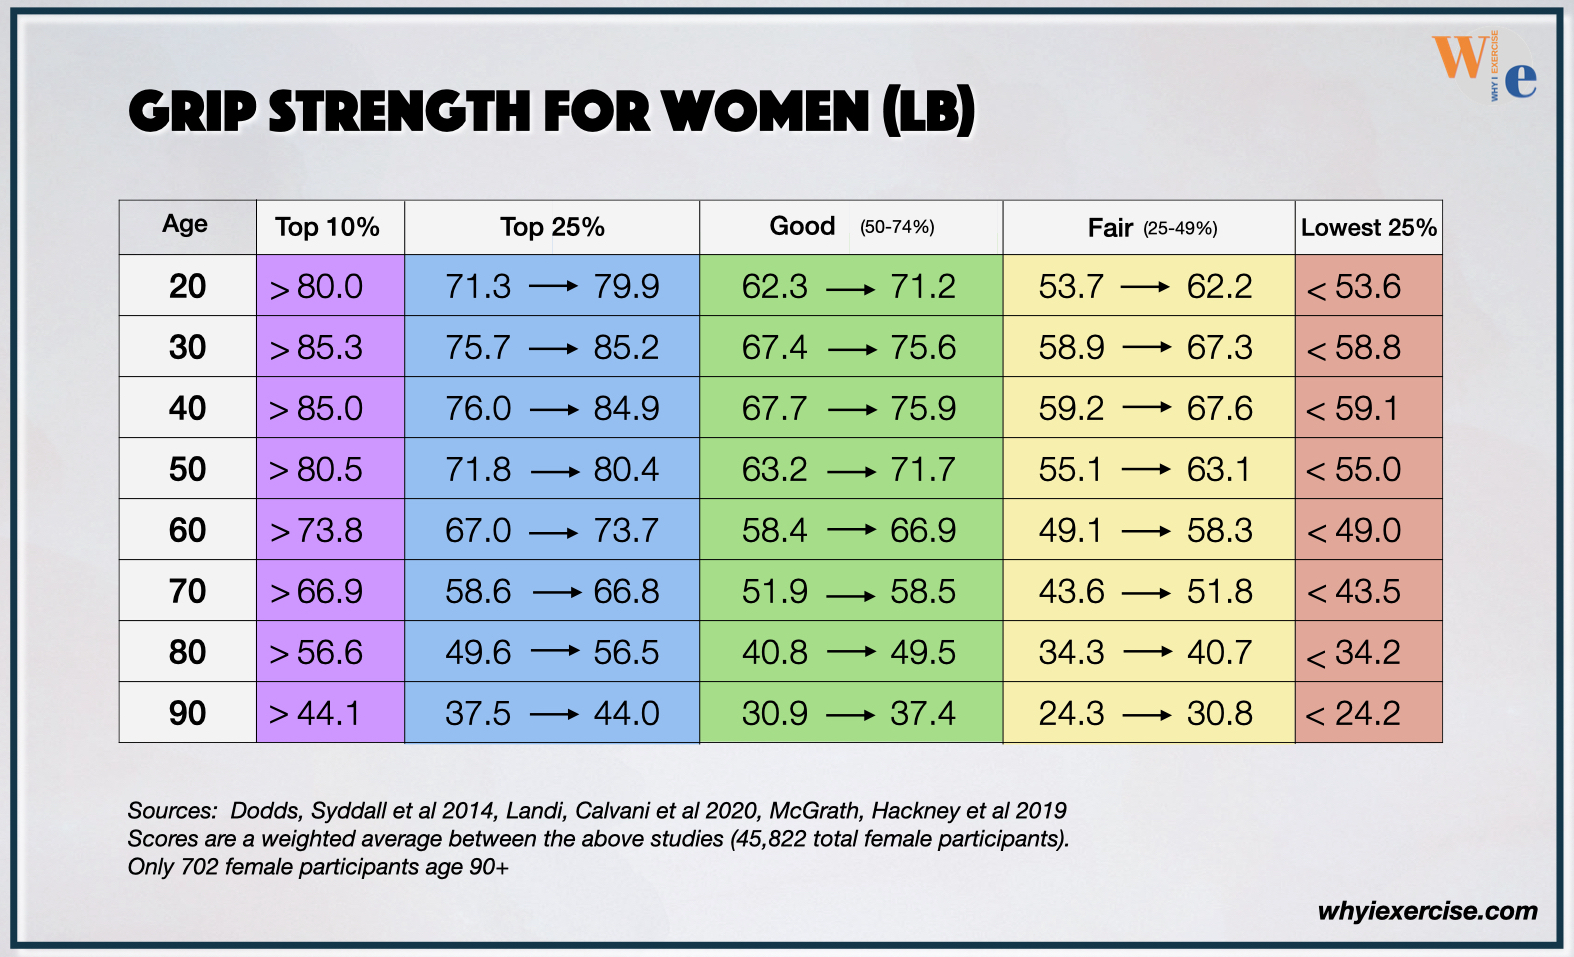 Age-group grip strength percentile charts for women in pounds.